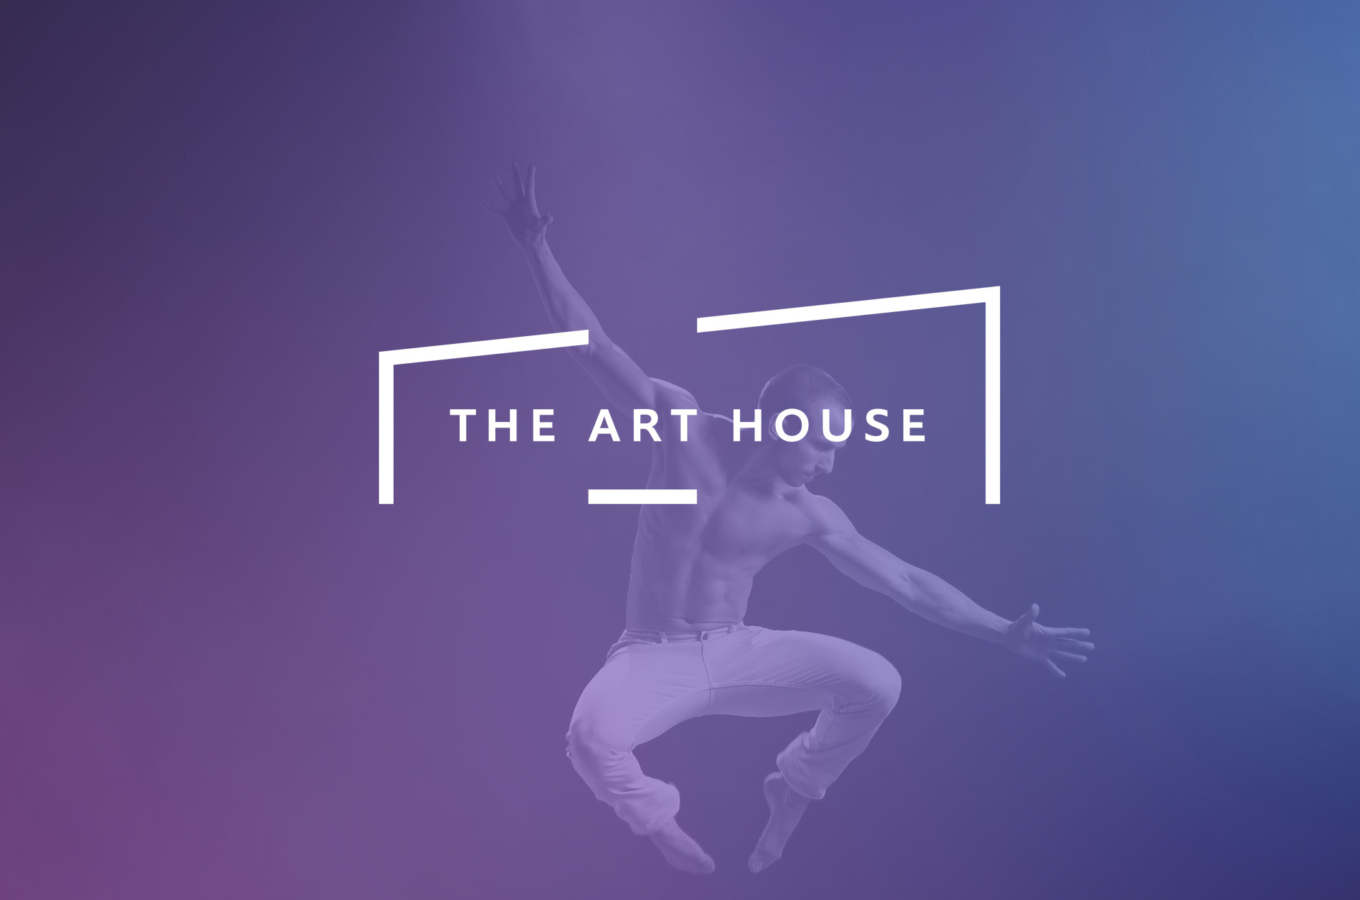 Wyong Council - The Art House